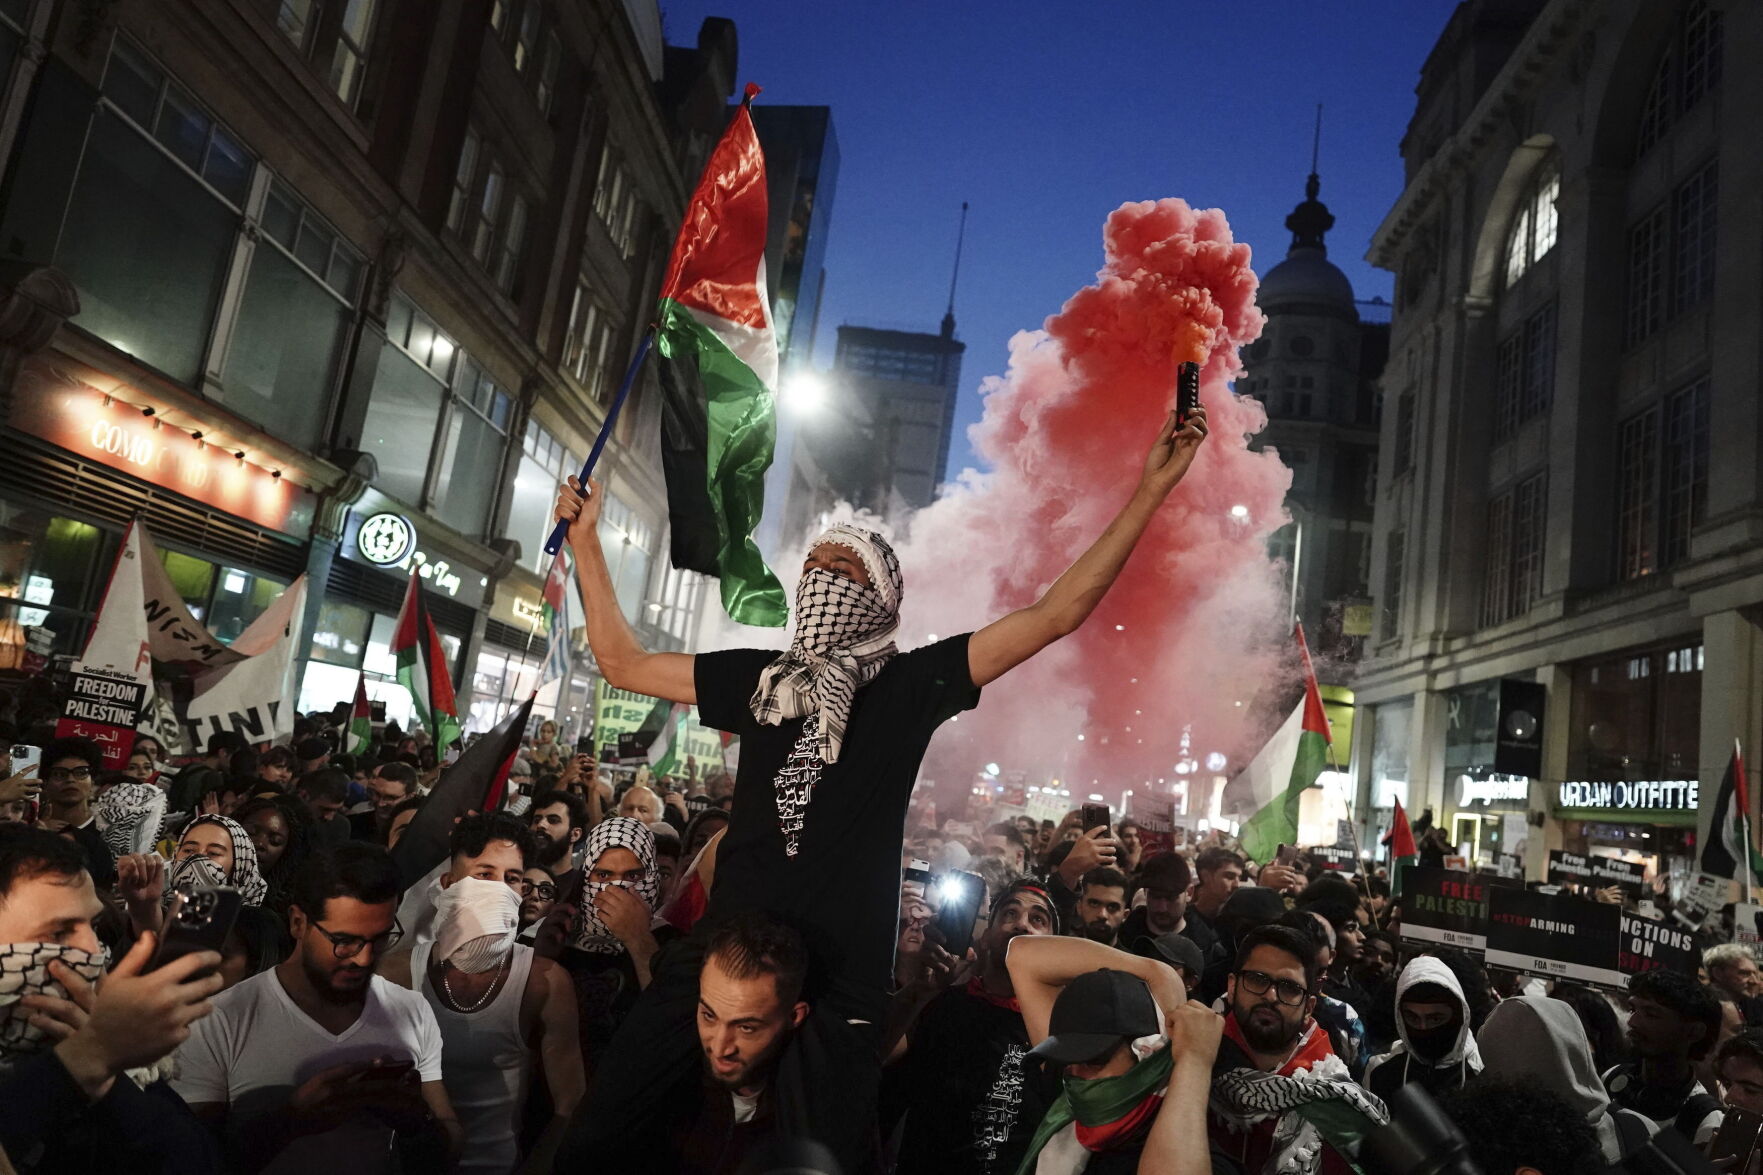 <p>People take part in a Palestine Solidarity Campaign demonstration near the Israeli Embassy, in Kensingston, London, as the death toll rises amid ongoing violence in Israel and Gaza following the attack by Hamas, Monday, Oct. 9, 2023. (Jordan Pettitt/PA via AP)</p>   PHOTO CREDIT: Jordan Pettitt - foreign subscriber, ASSOCIATED PRESS